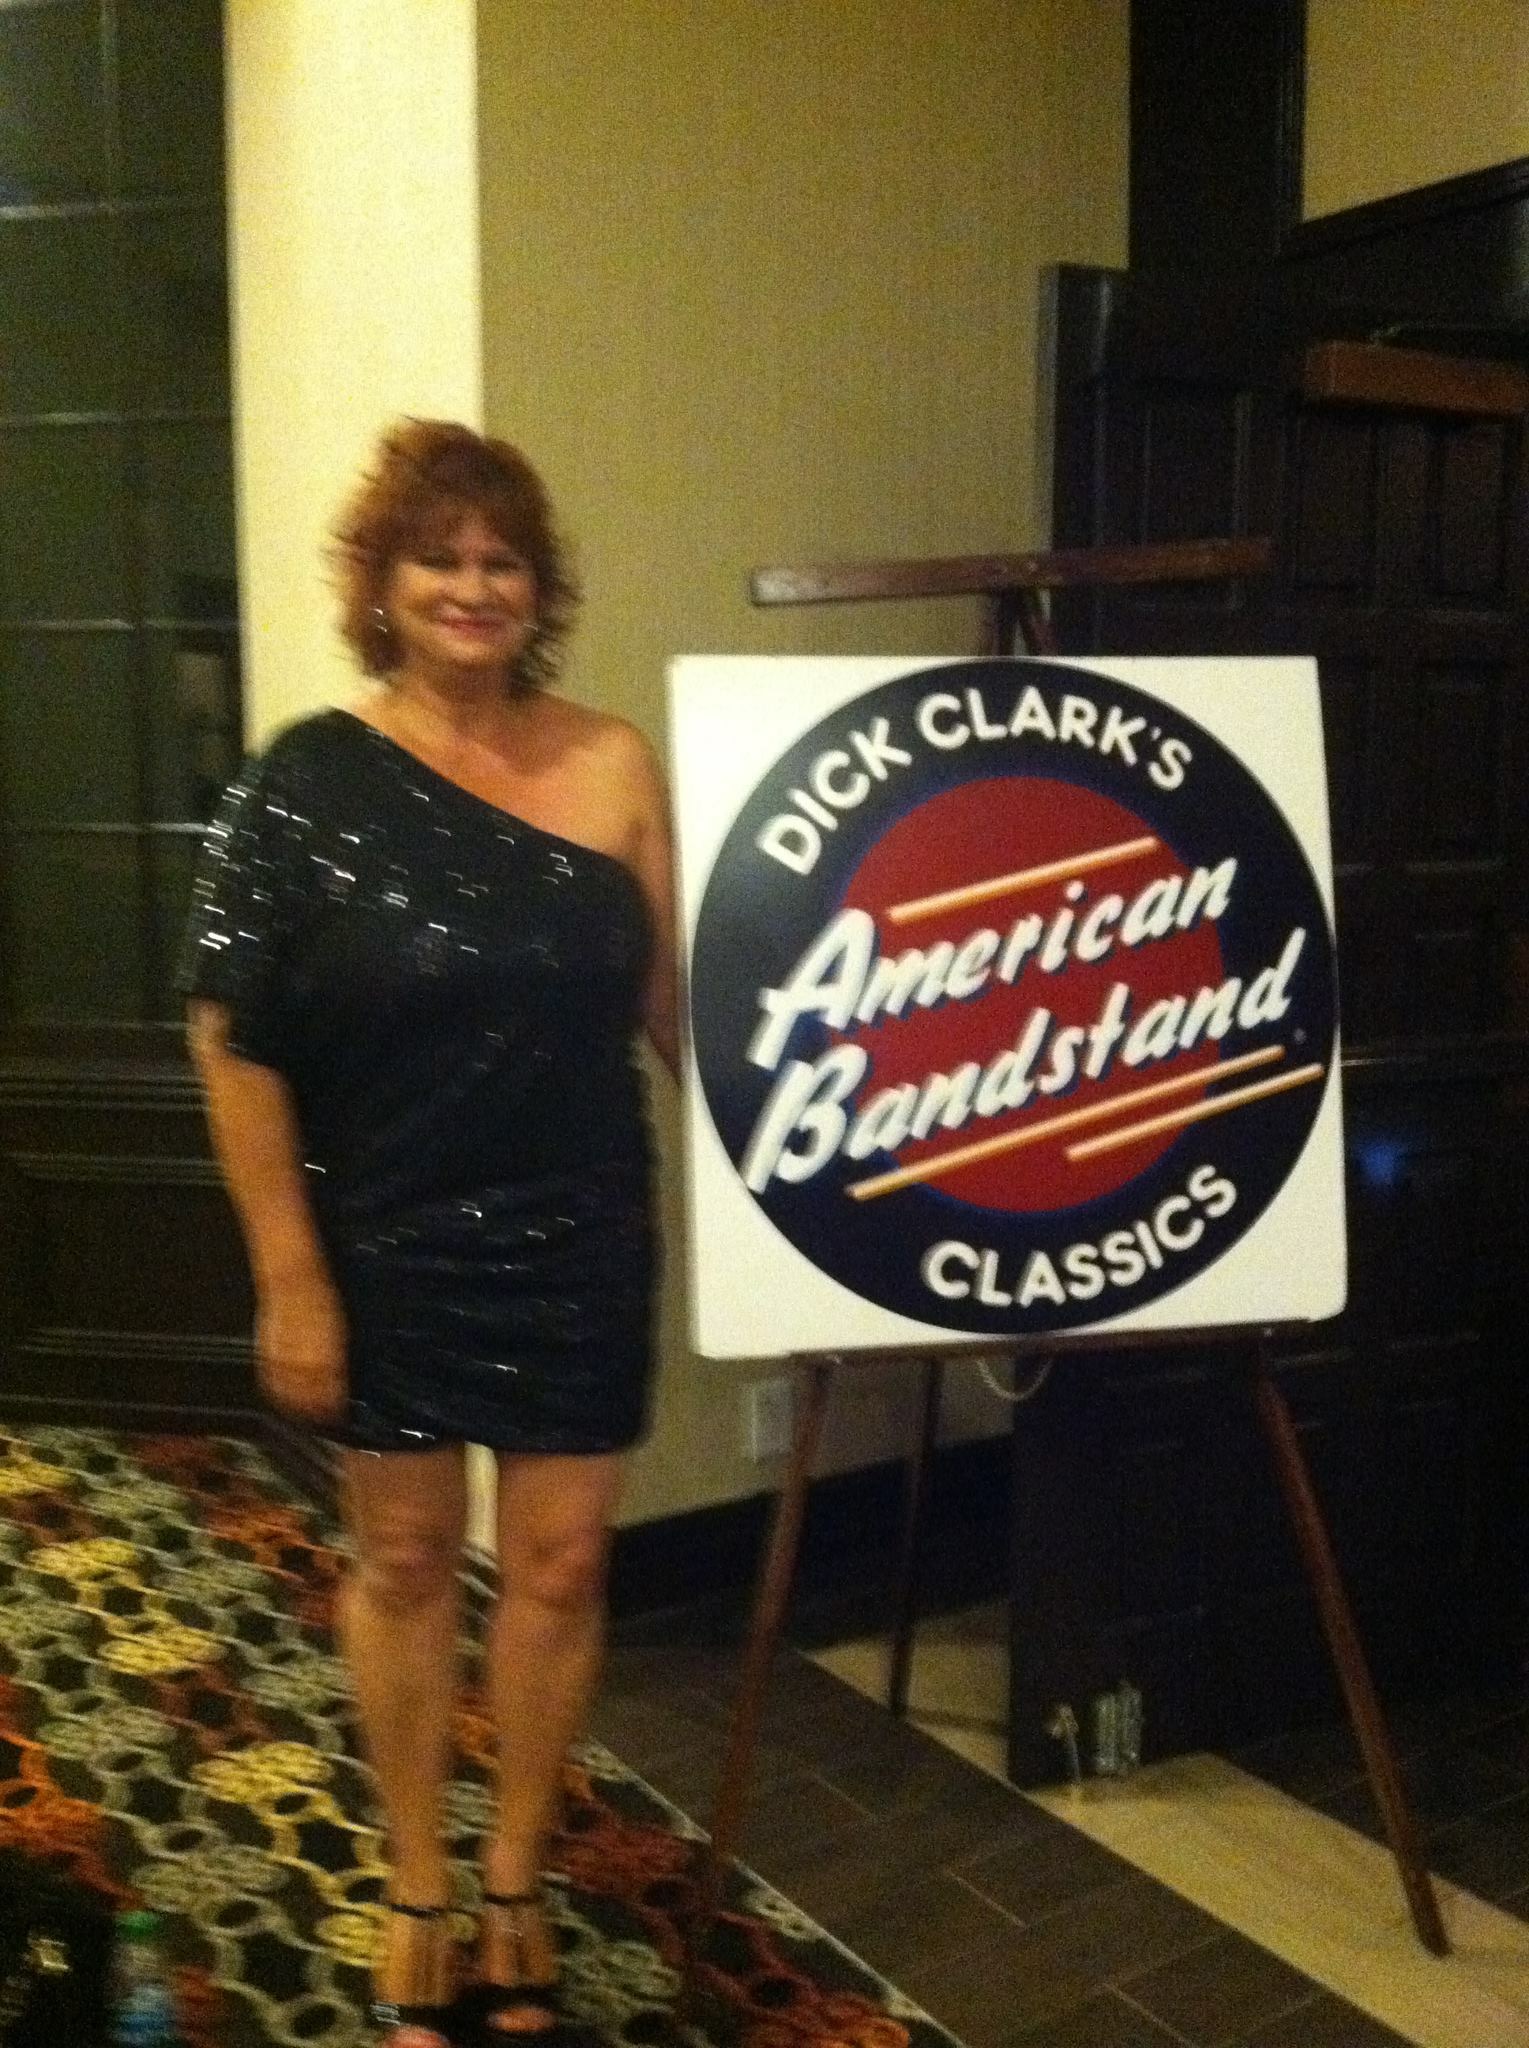 American Bandstand Event